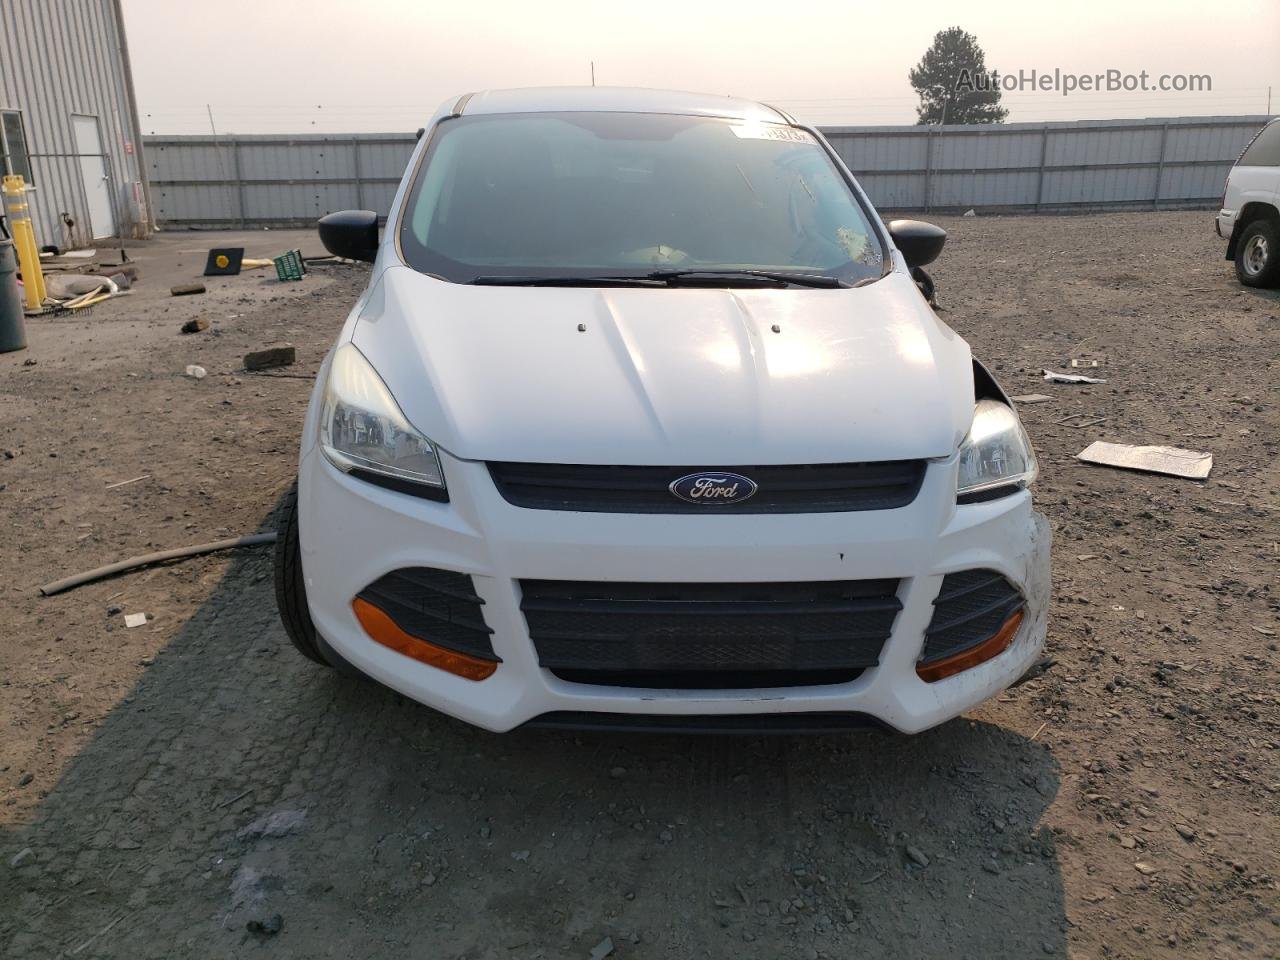 2016 Ford Escape S Белый vin: 1FMCU0F71GUC12586